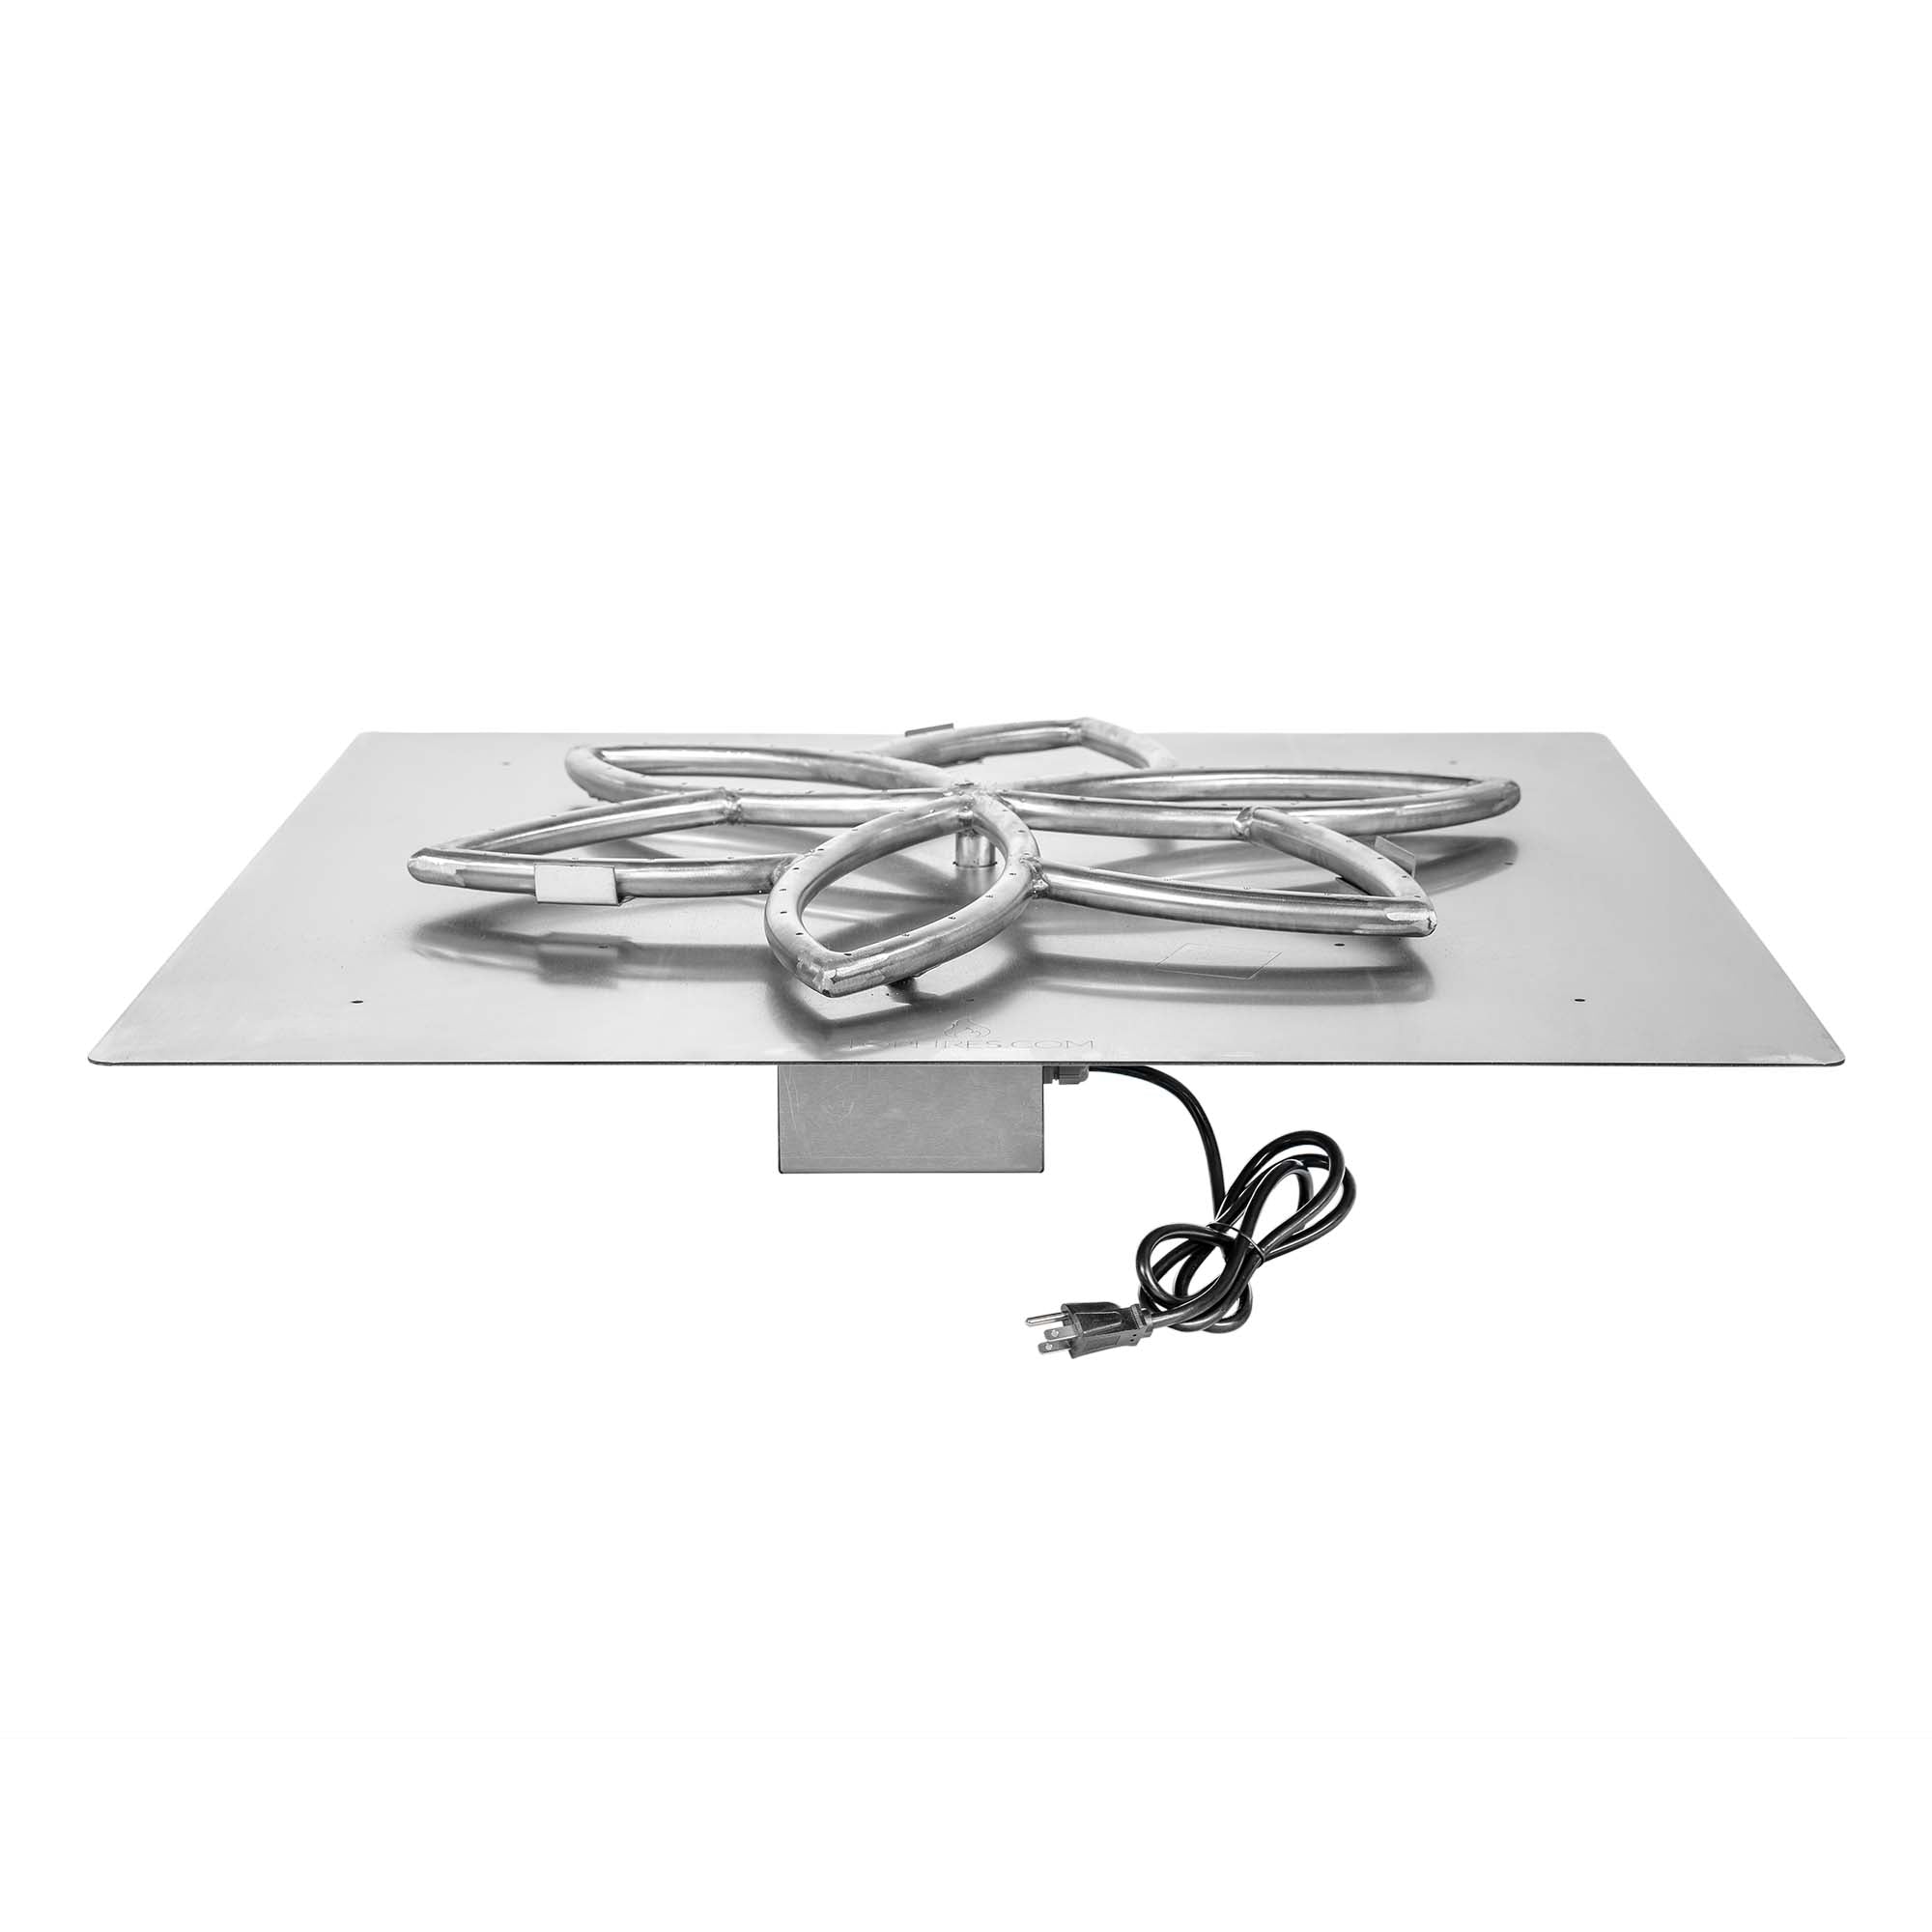 The Outdoor Plus Square Flat Pan with Stainless Steel Lotus Burner